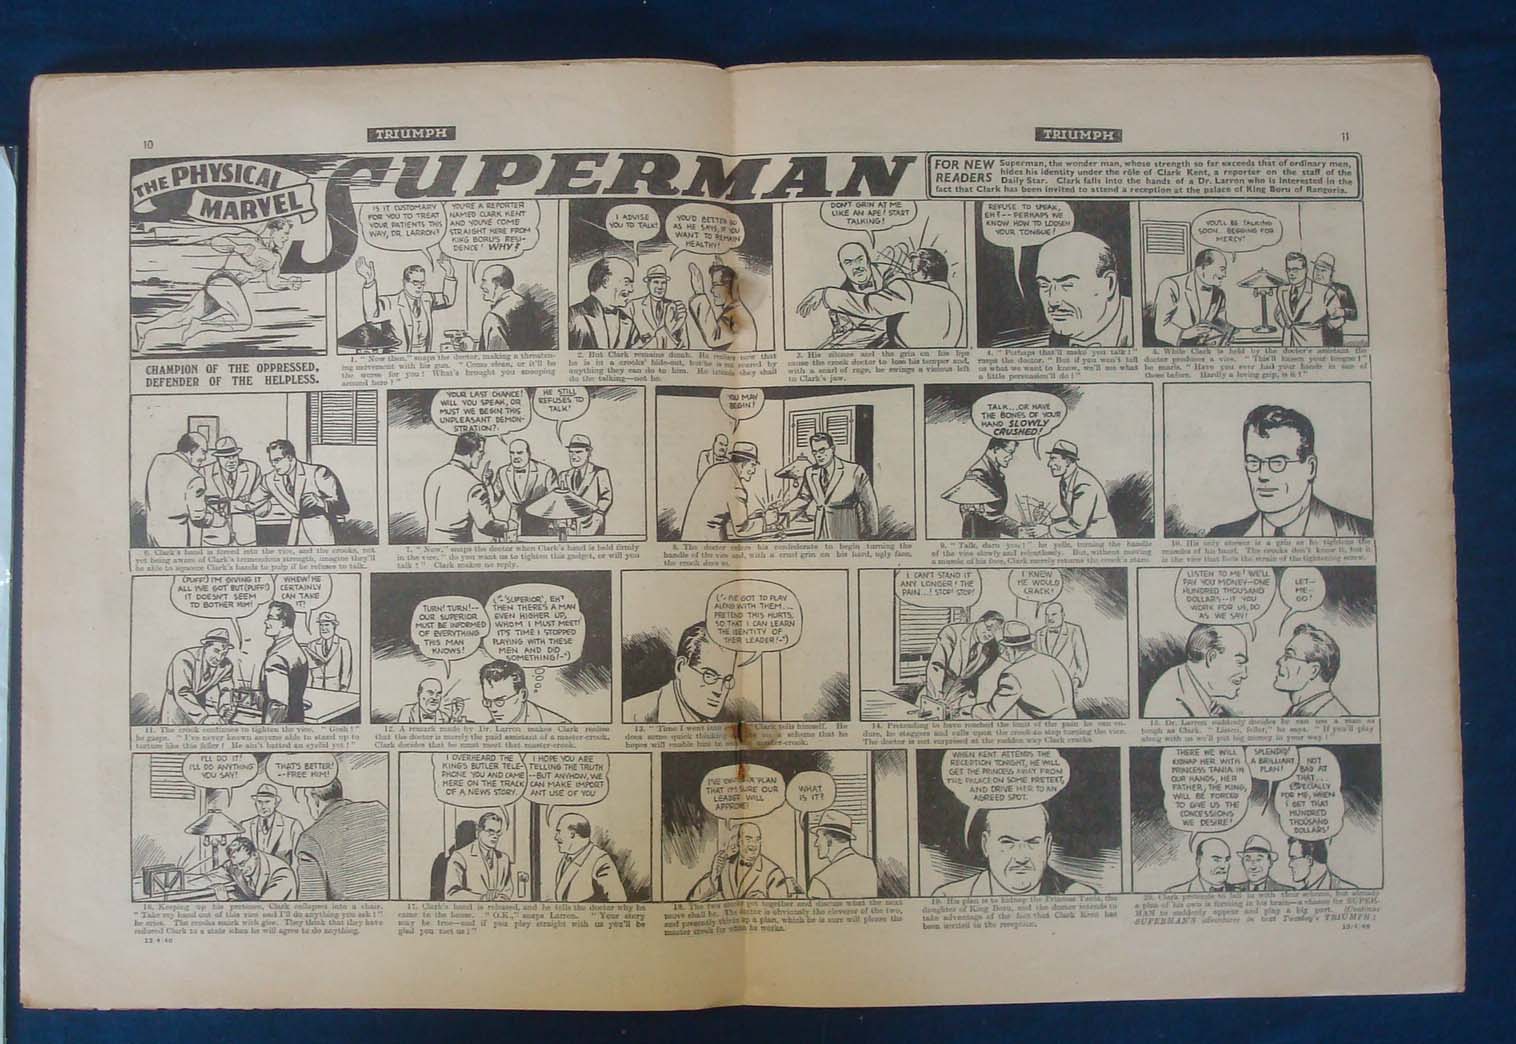 1940 The Triumph and Gem Comic: Featuring Superman 13th April 1940 having staple bleed